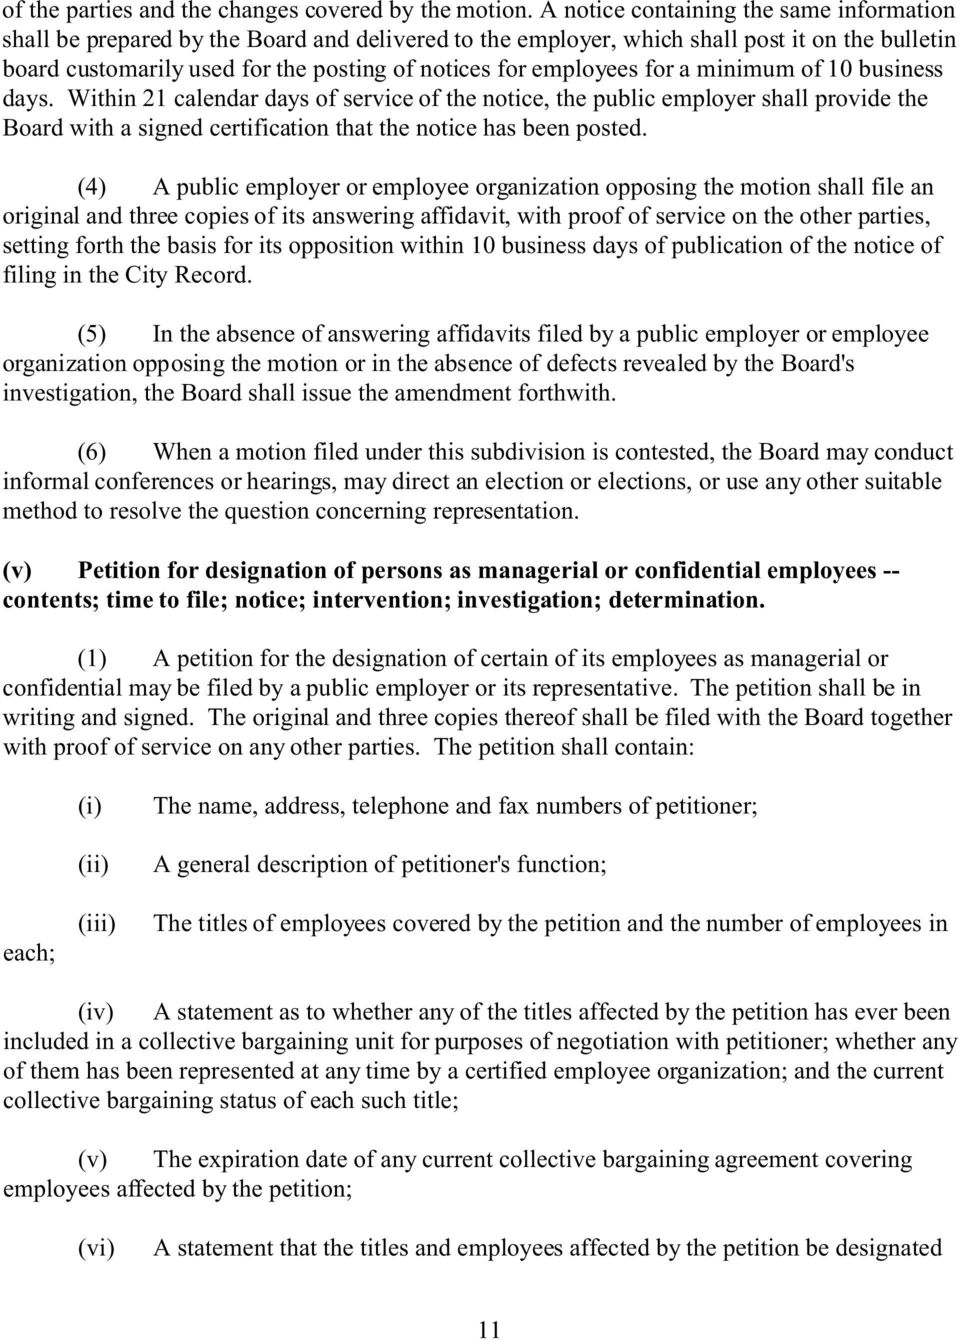 employees for a minimum of 10 business days. Within 21 calendar days of service of the notice, the public employer shall provide the Board with a signed certification that the notice has been posted.